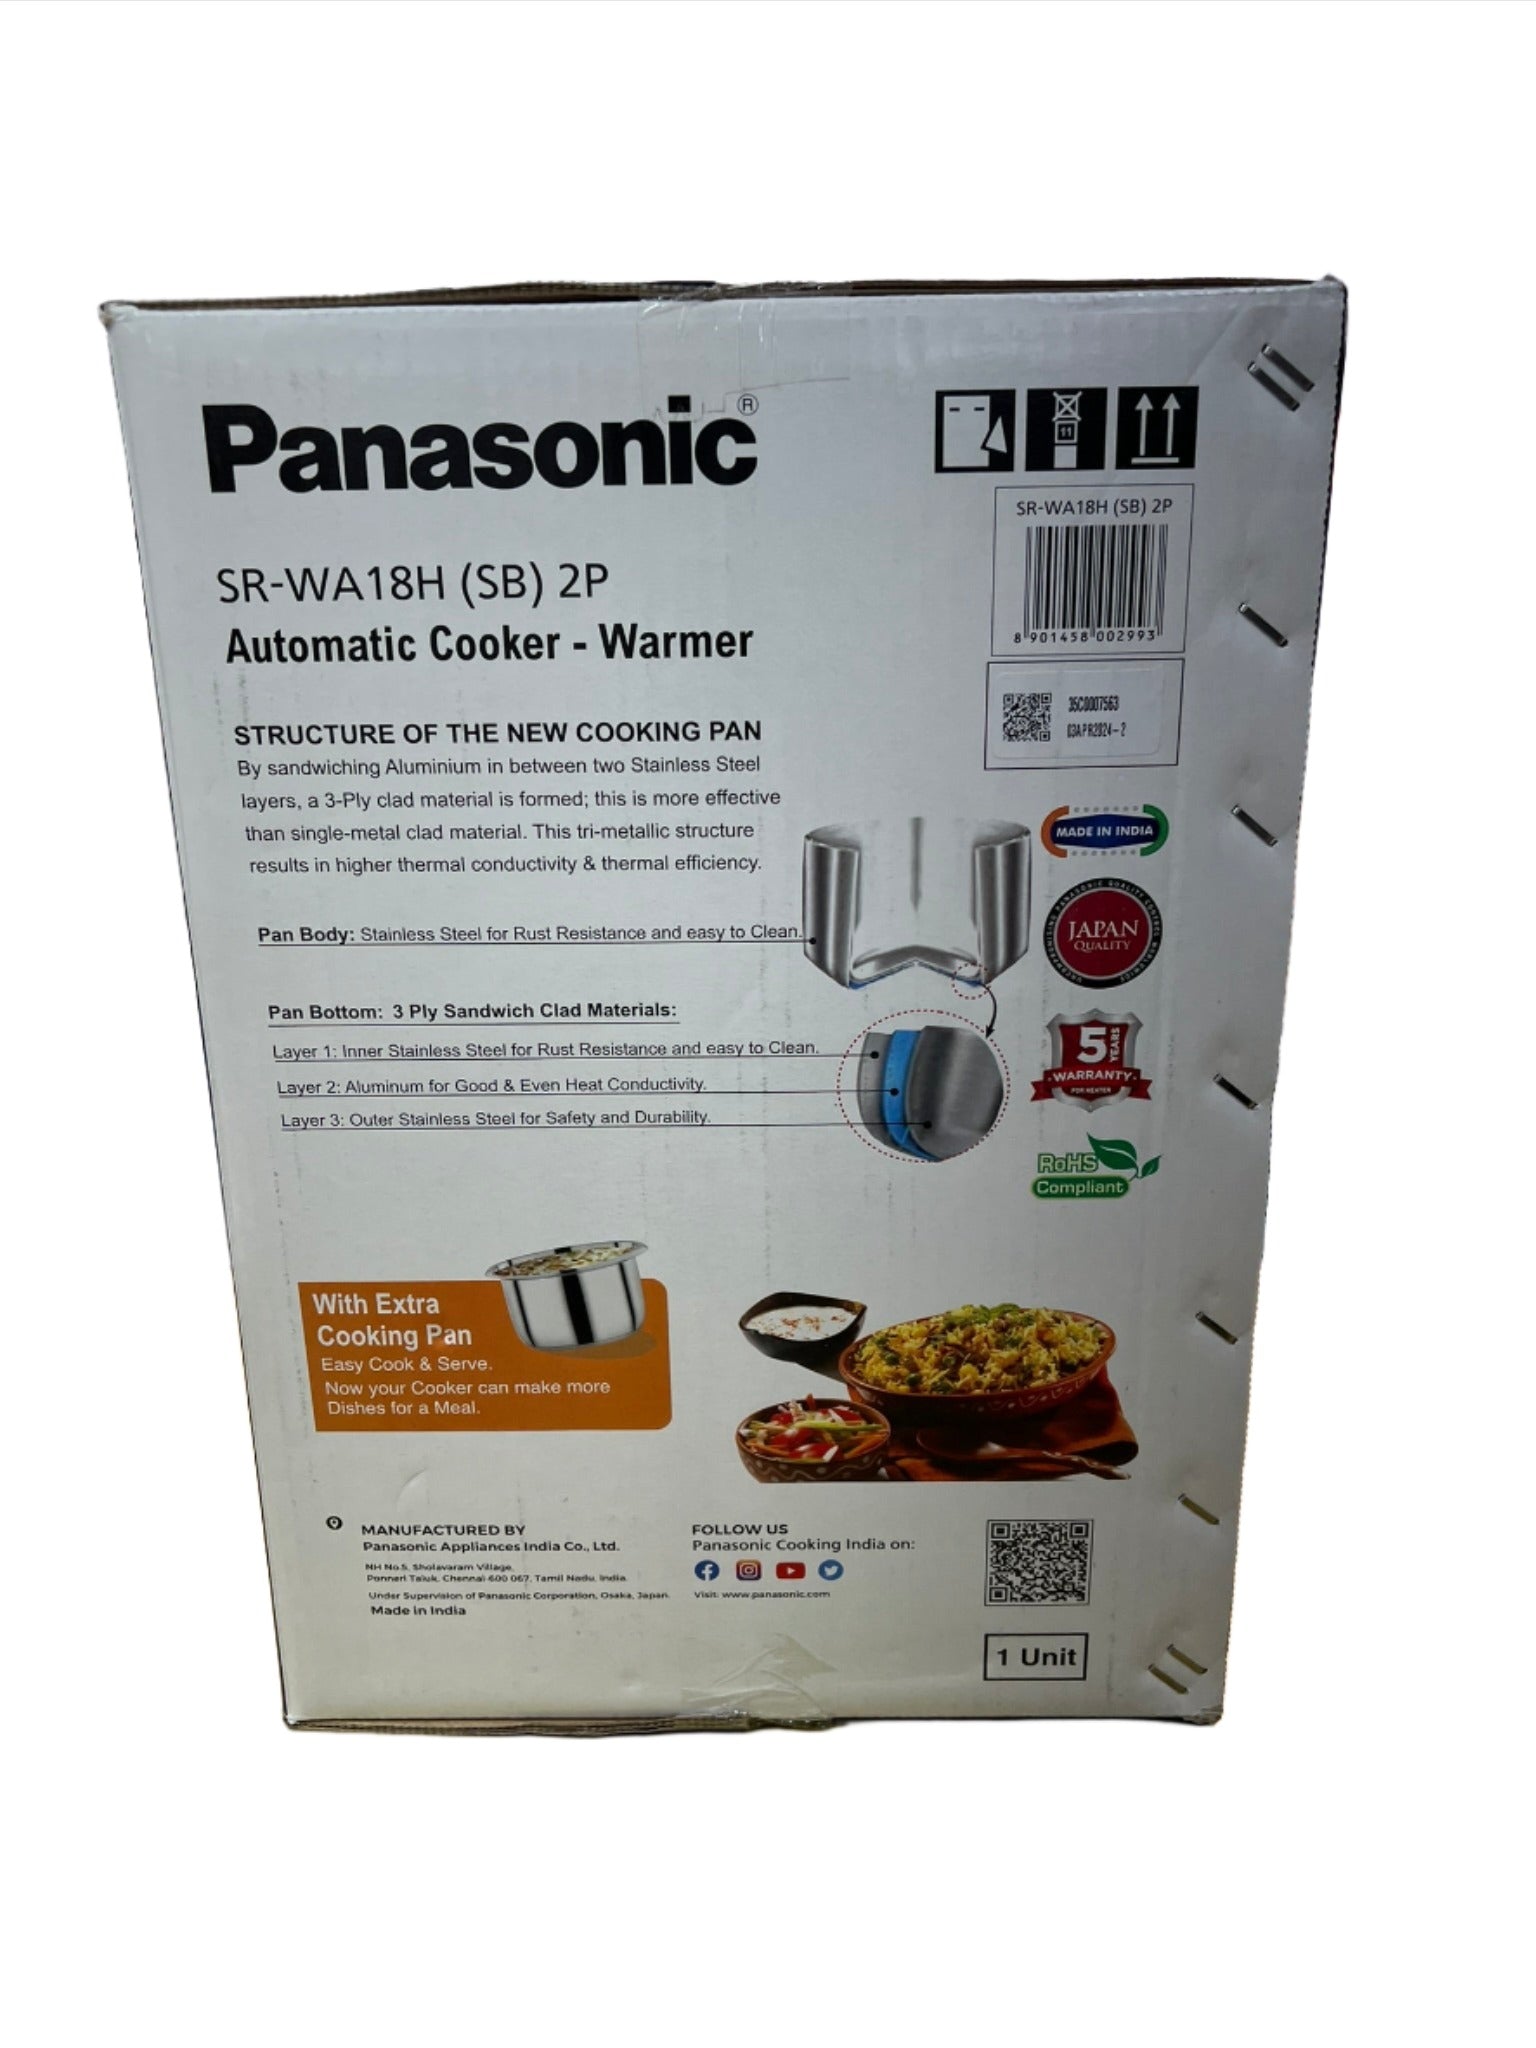 Panasonic SR-WA18H(SB) 2P Automatic Cooker-Warmer side view with details